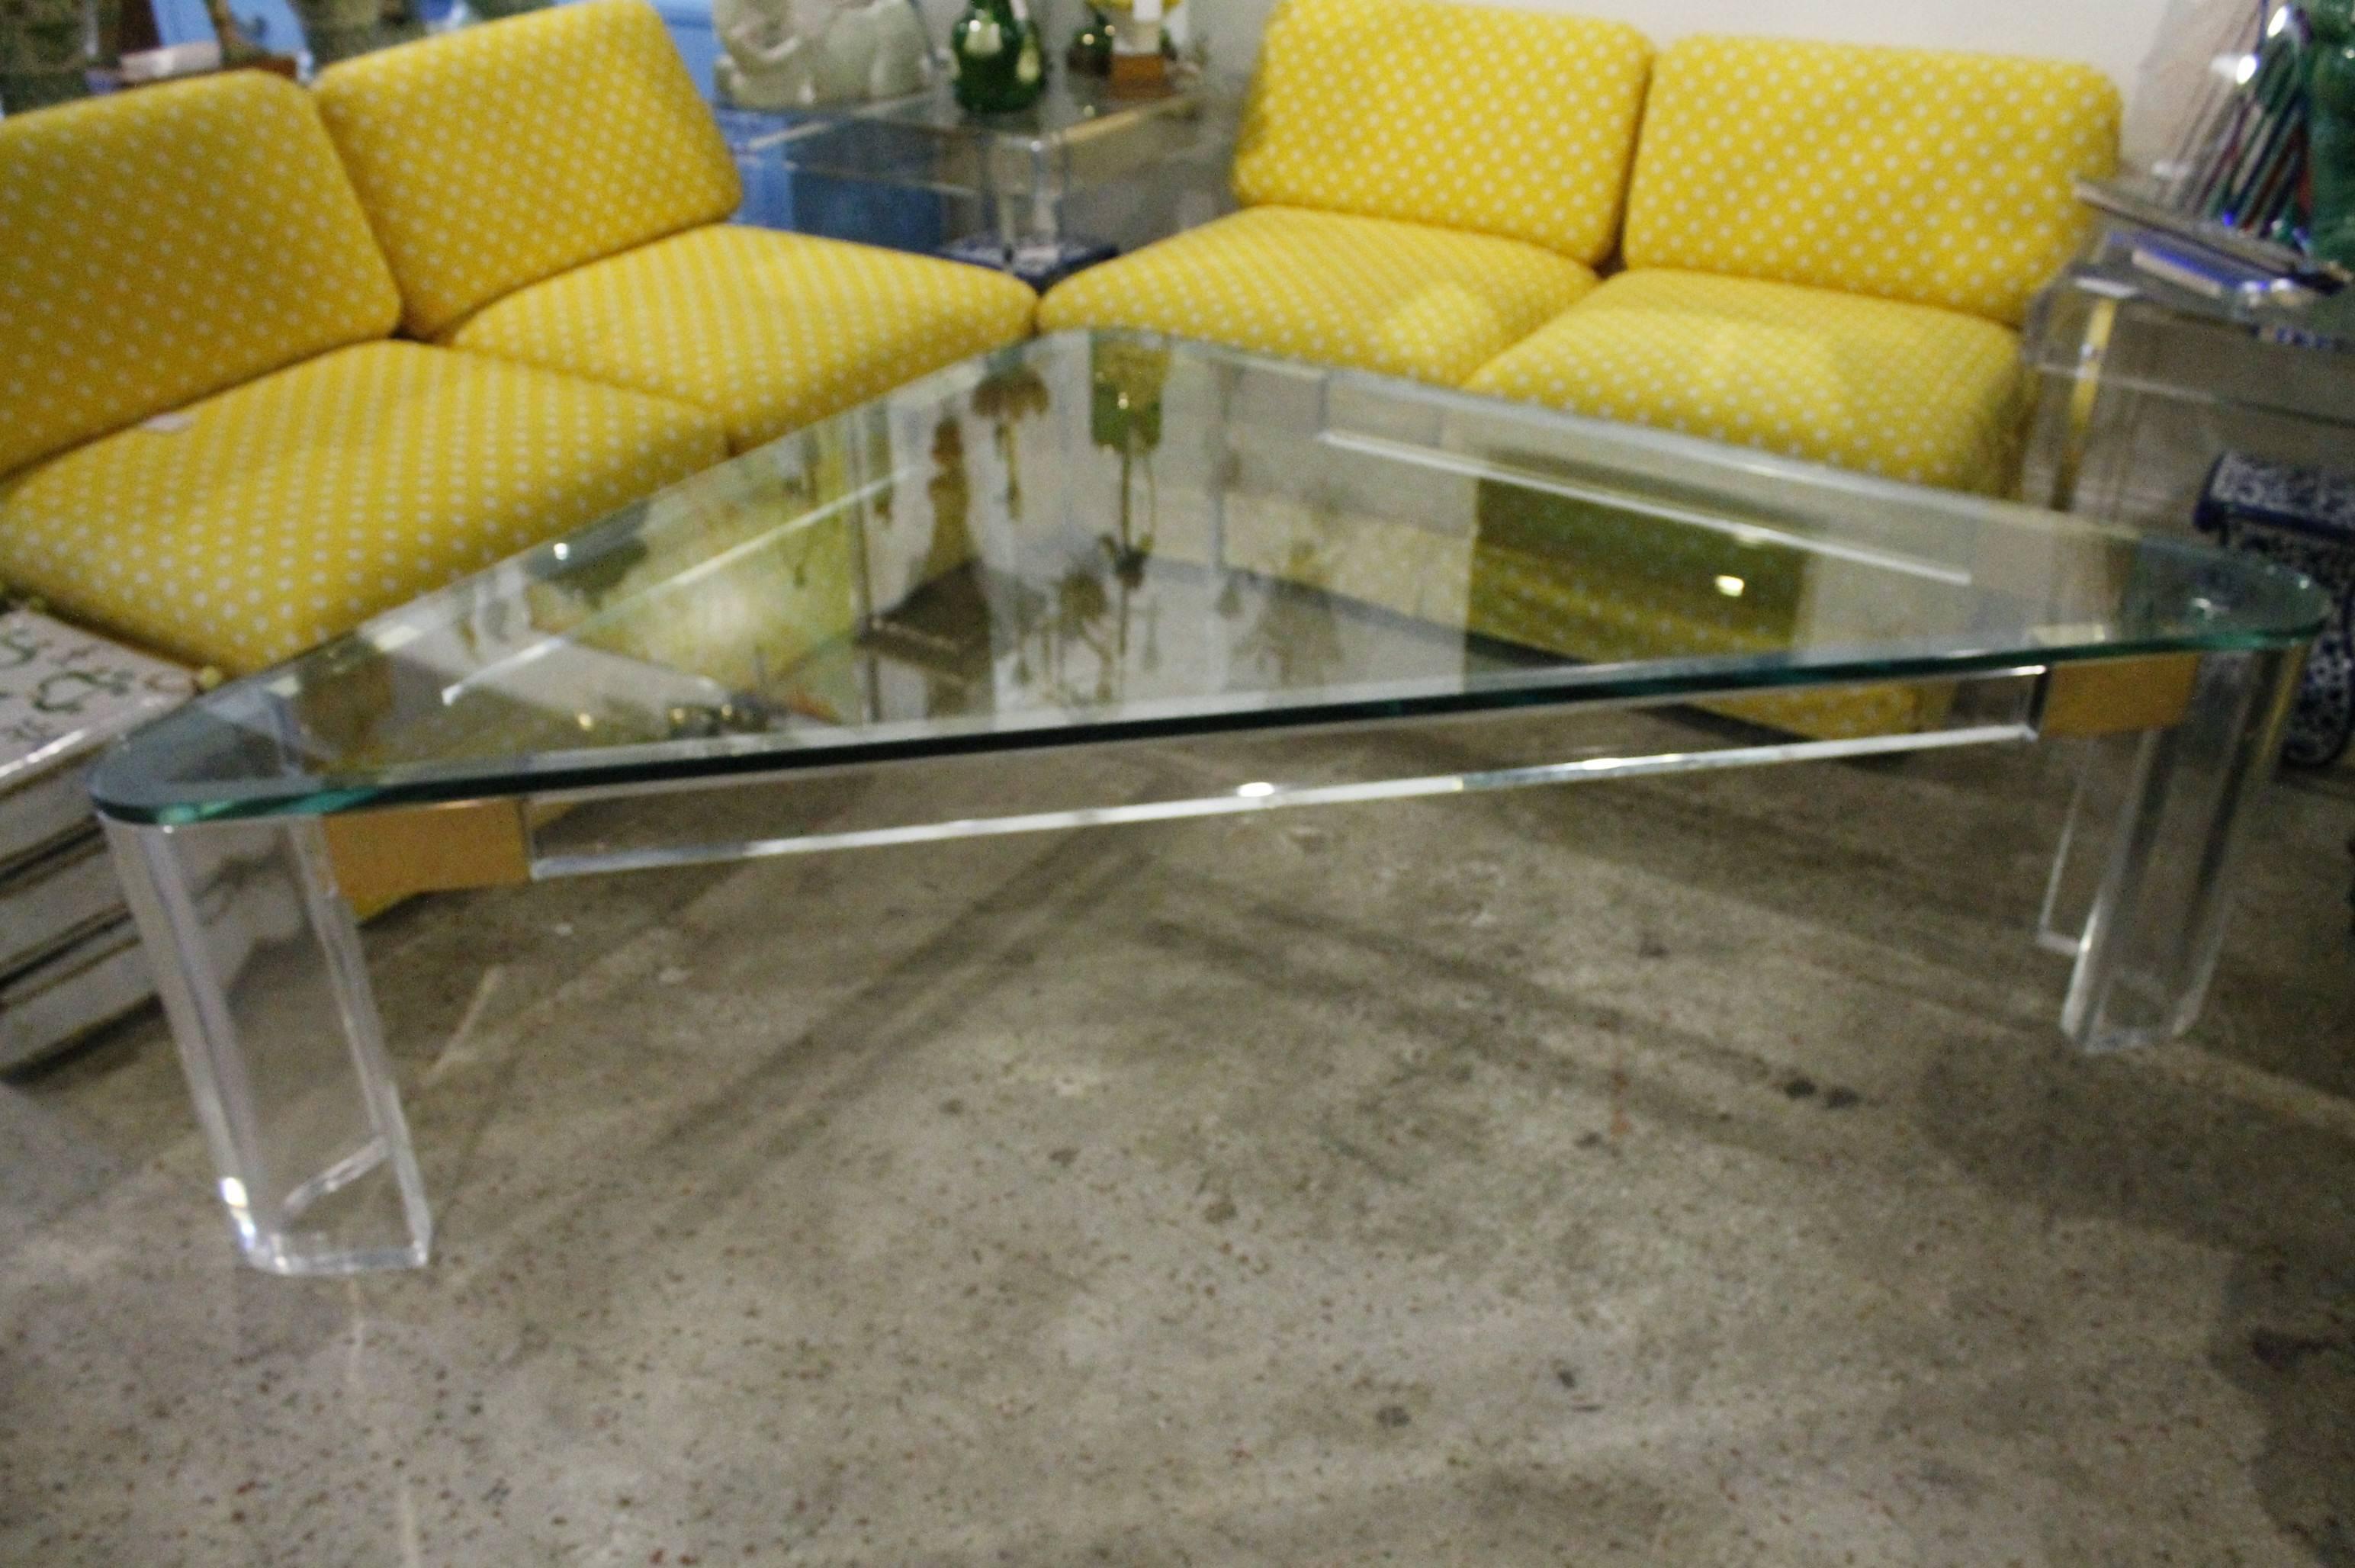 Amazing Vintage Hollywood Regency Monumental Size Lucite and Brass Triangle Charles Hollis Jones Coffee Table. Perfect for sectionals. Extra thick Lucite! 2" thick Lucite! Comes with original 3/4 in thick glass top which does have some surface